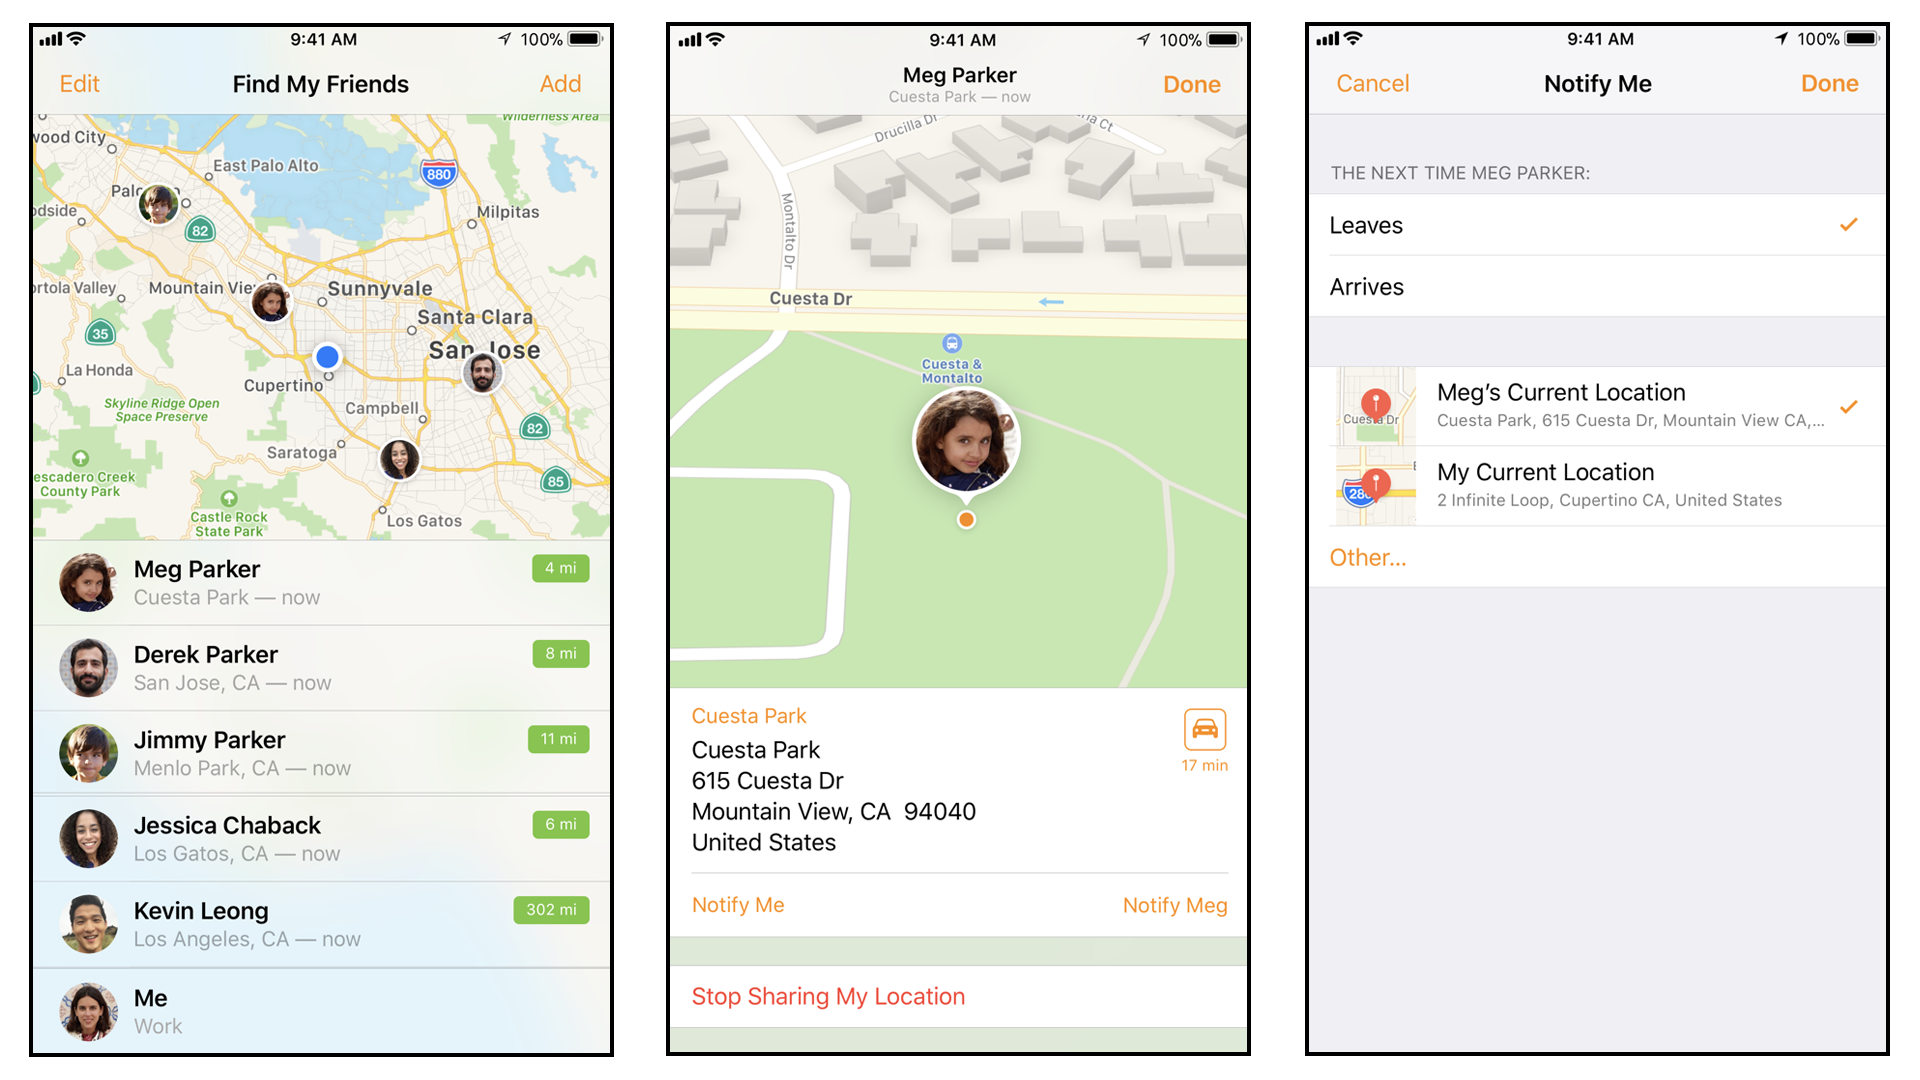 The Find My Friends interface on an iPhone